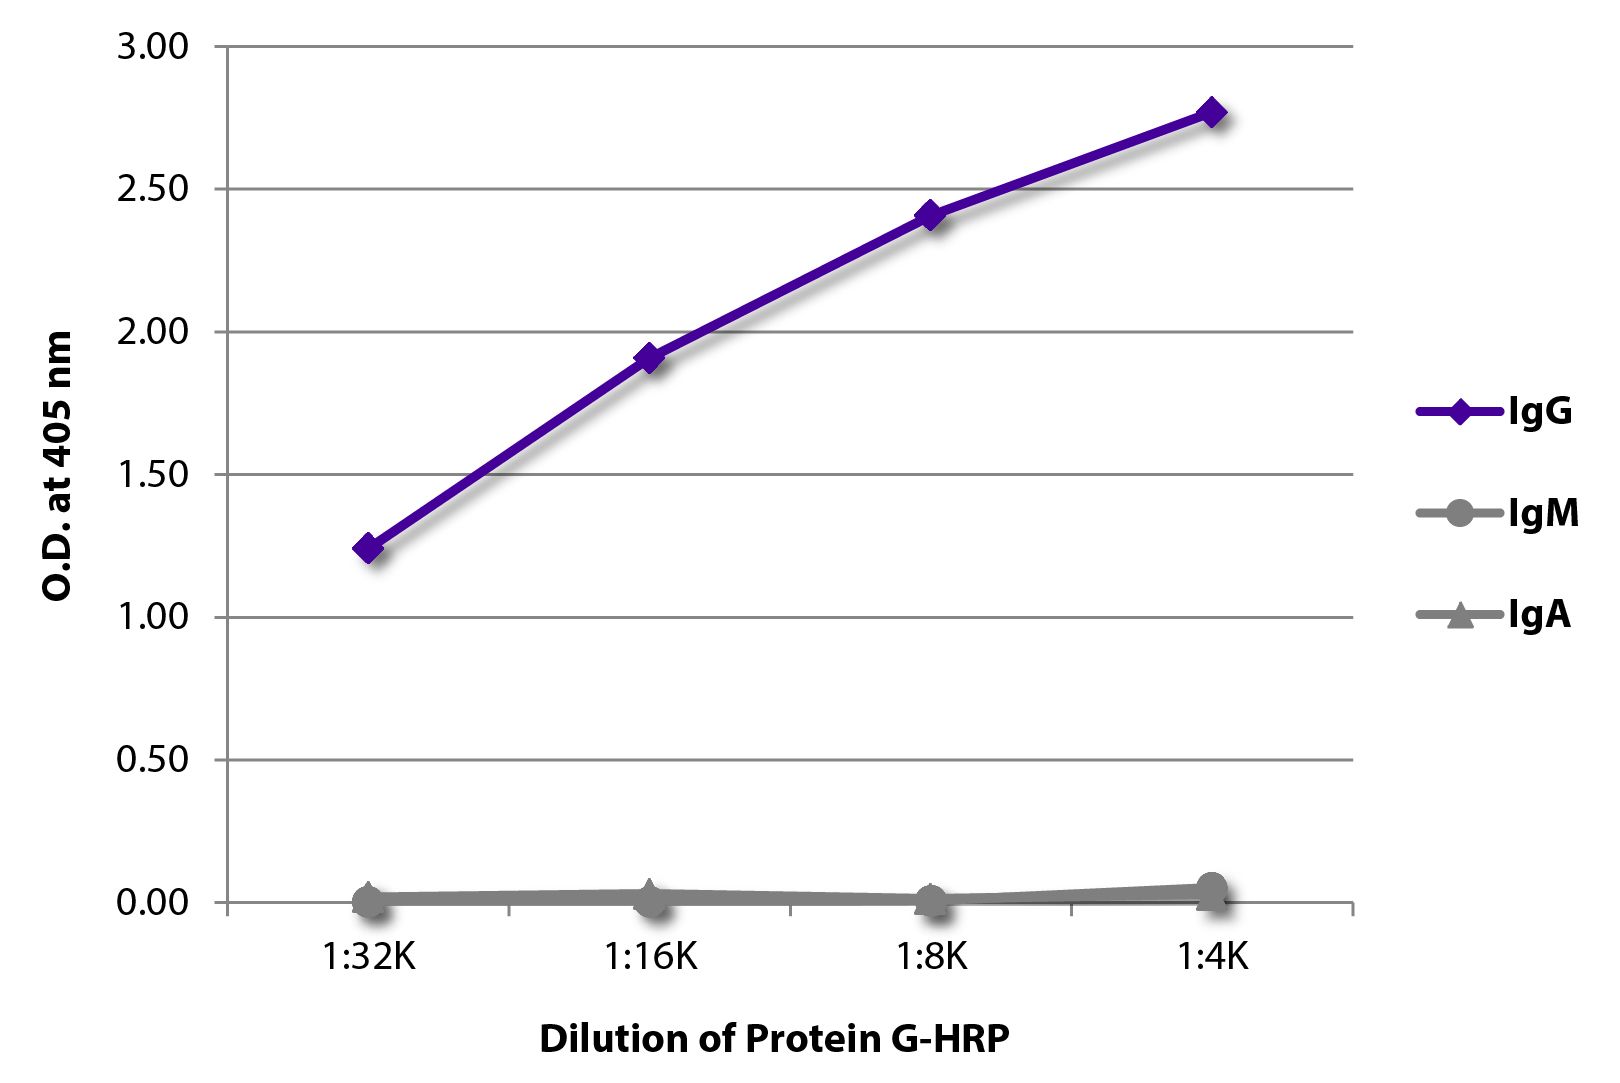 ELISA plate was coated with purified human IgG, IgM, and IgA.  Immunoglobulins were detected with serially diluted Protein G-HRP (SB Cat. No. 7406-05).